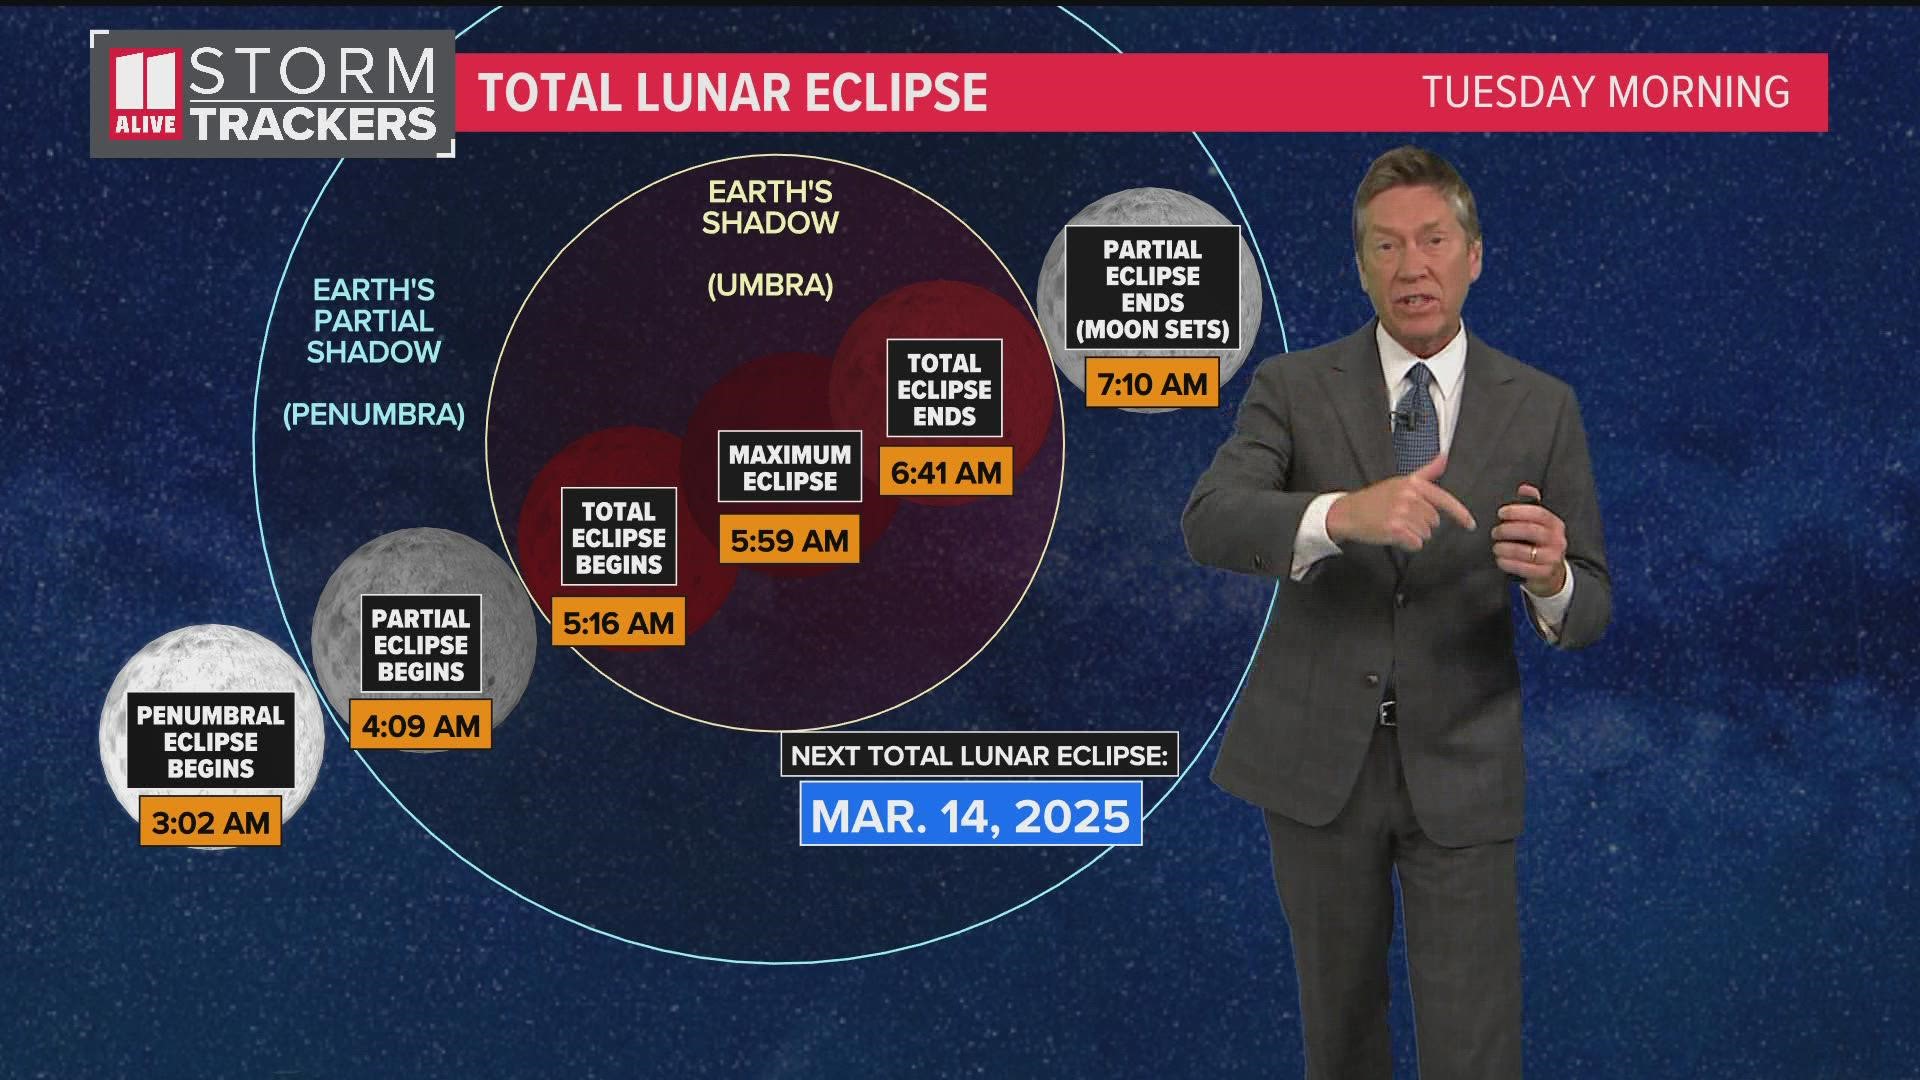 The second total lunar eclipse of 2022 takes place pre-dawn Tuesday morning, and it will be our last chance to see a total lunar eclipse until March 14, 2025.